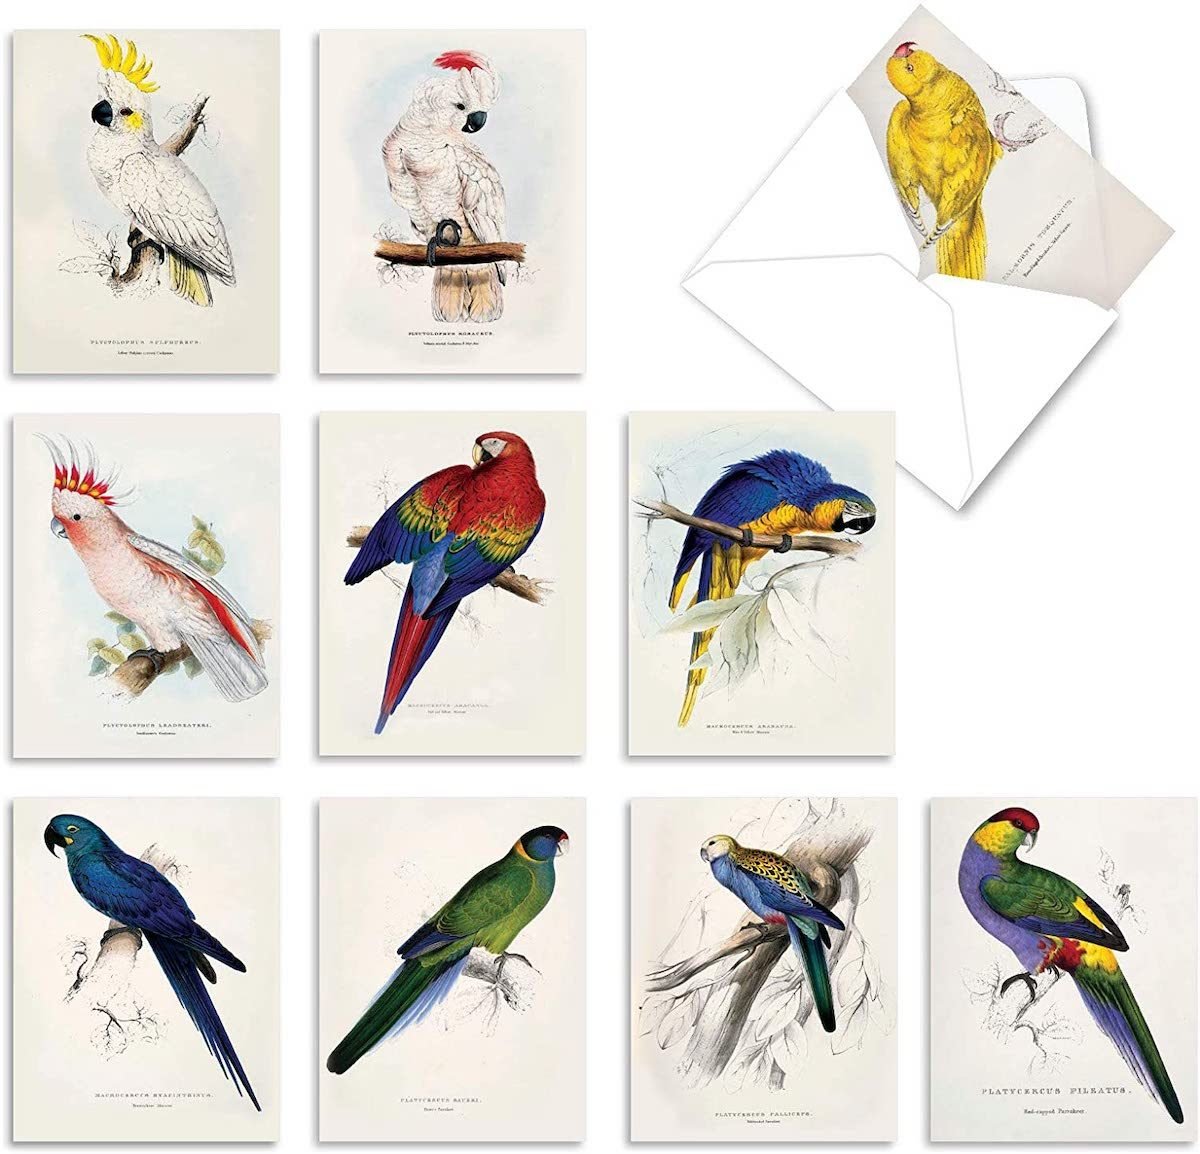 New Bird Christmas Cards 2021 Images